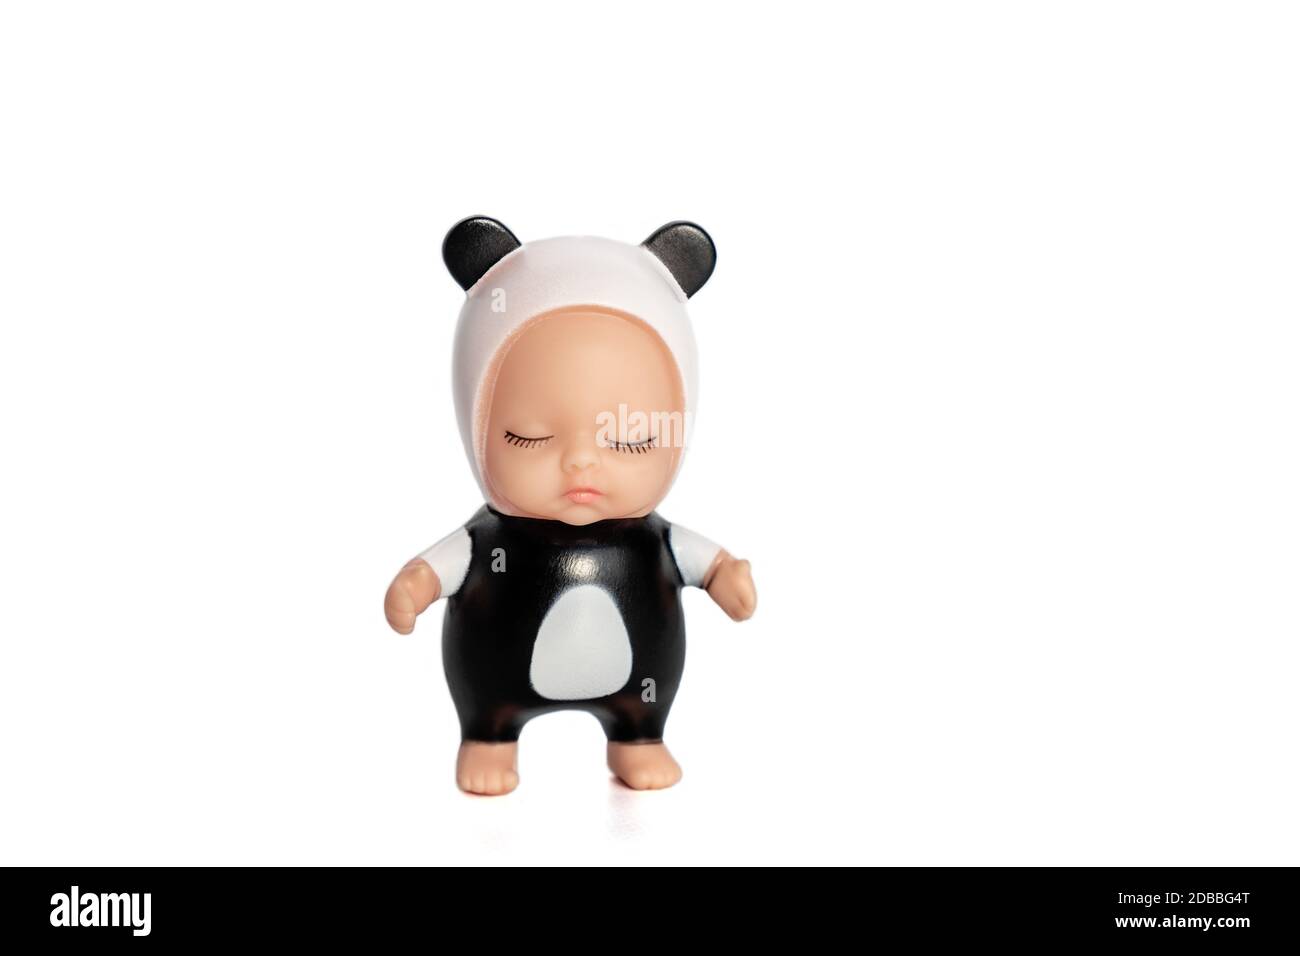 Cute little doll in a panda costume with closed eyes. Stands on a white isolated background. An adorable toy for a gift or a child's play. Soft focus. Stock Photo